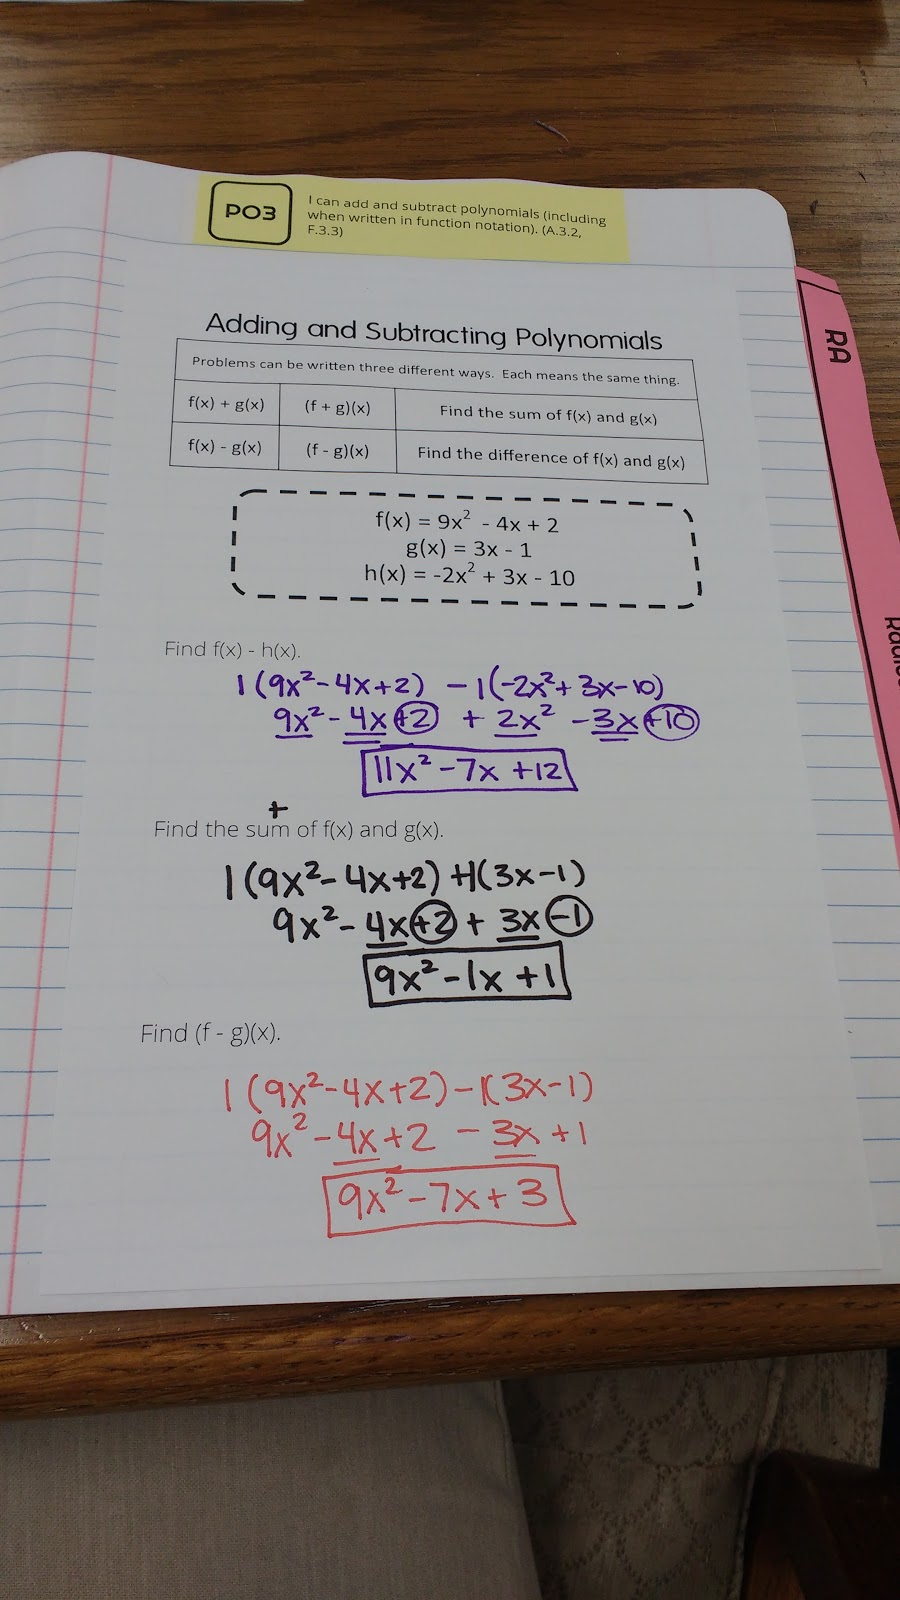 Adding and Subtracting Polynomials Graphic Organizer